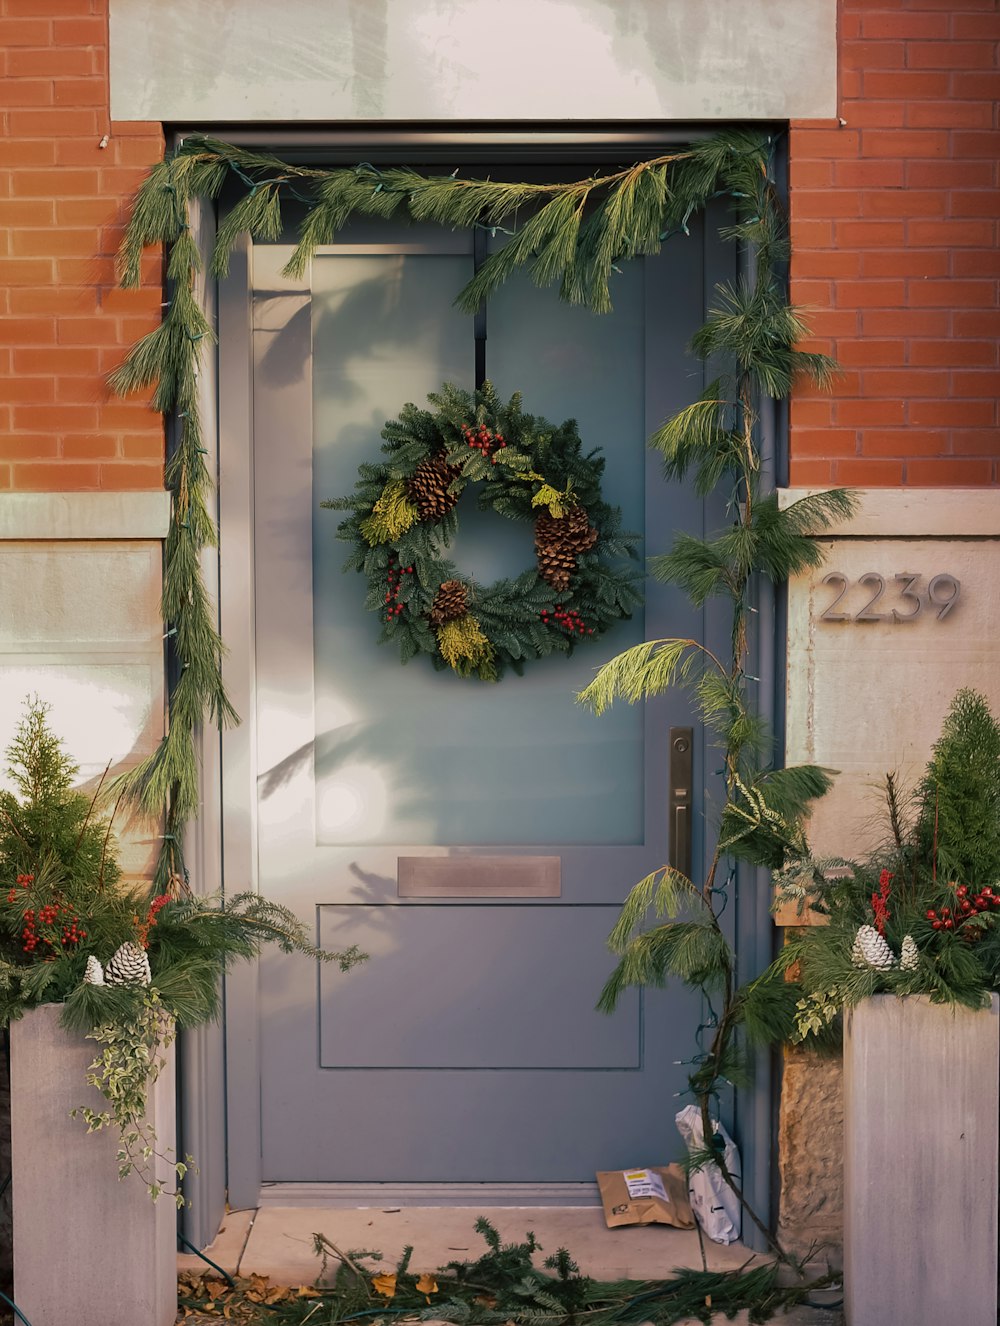 a blue door with a wreath on it